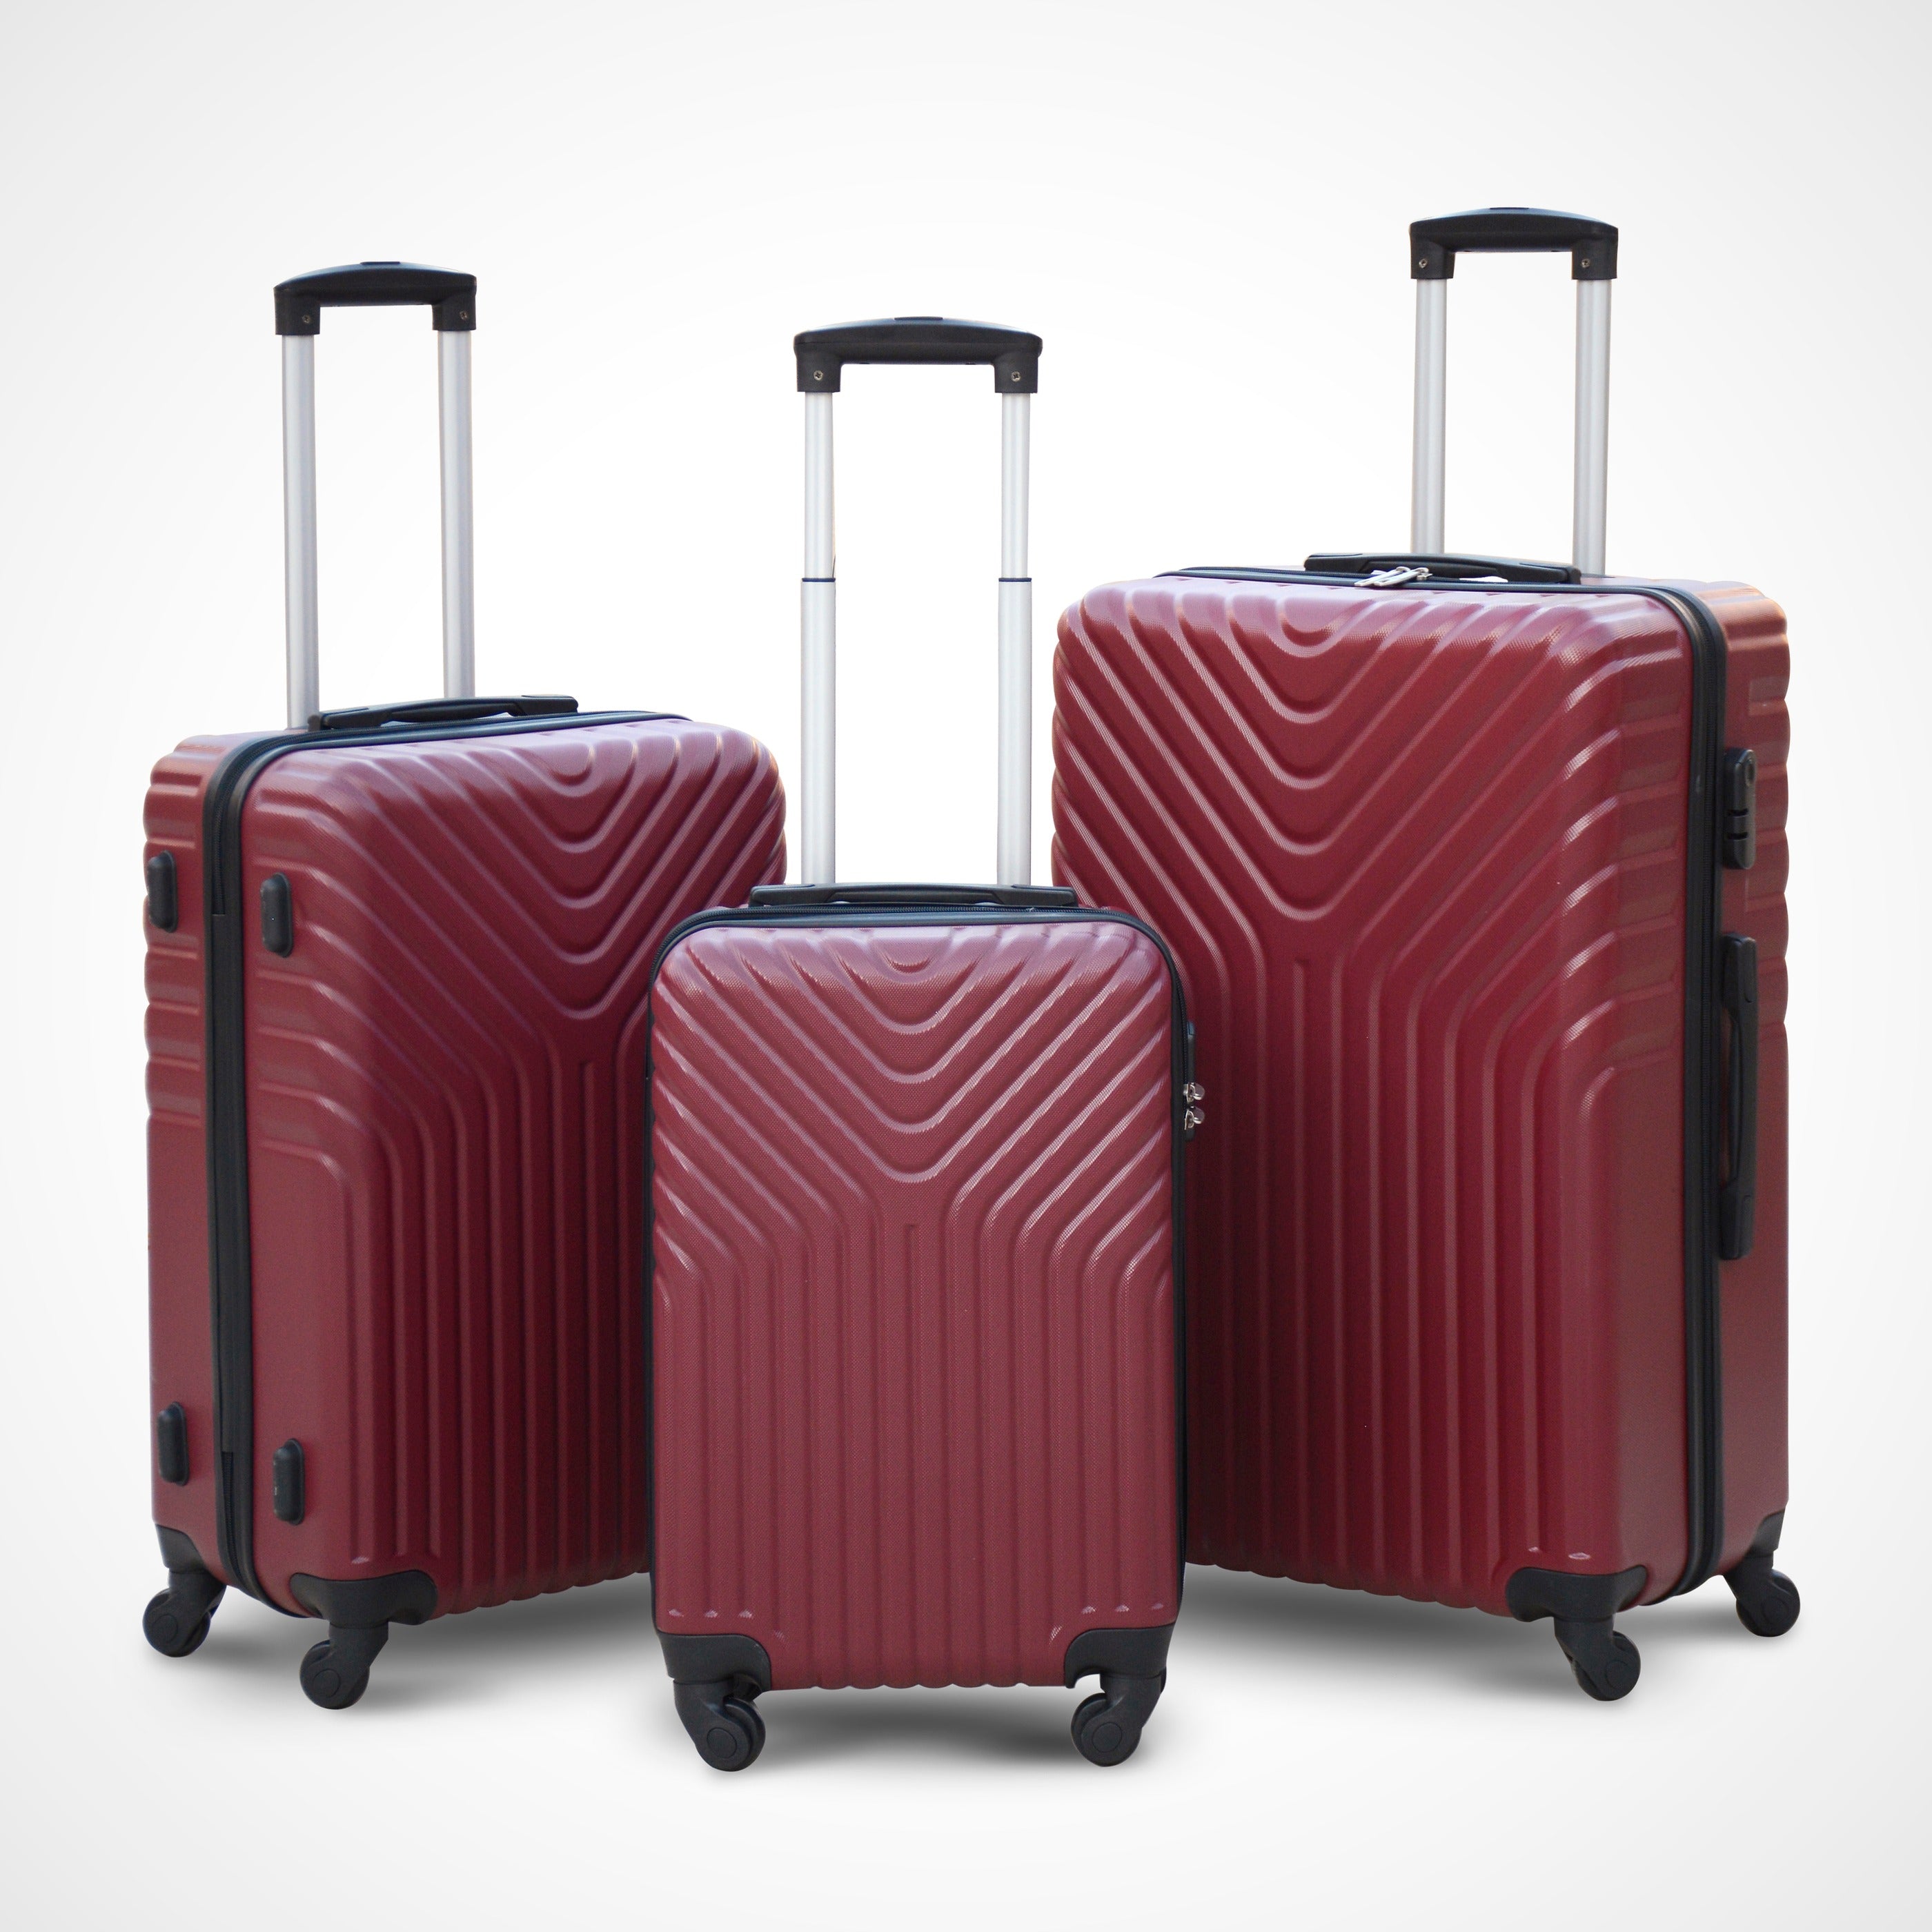 Si New Abs Light Weight Travel Luggage | 3 Pcs Set | Red| Tbl0002